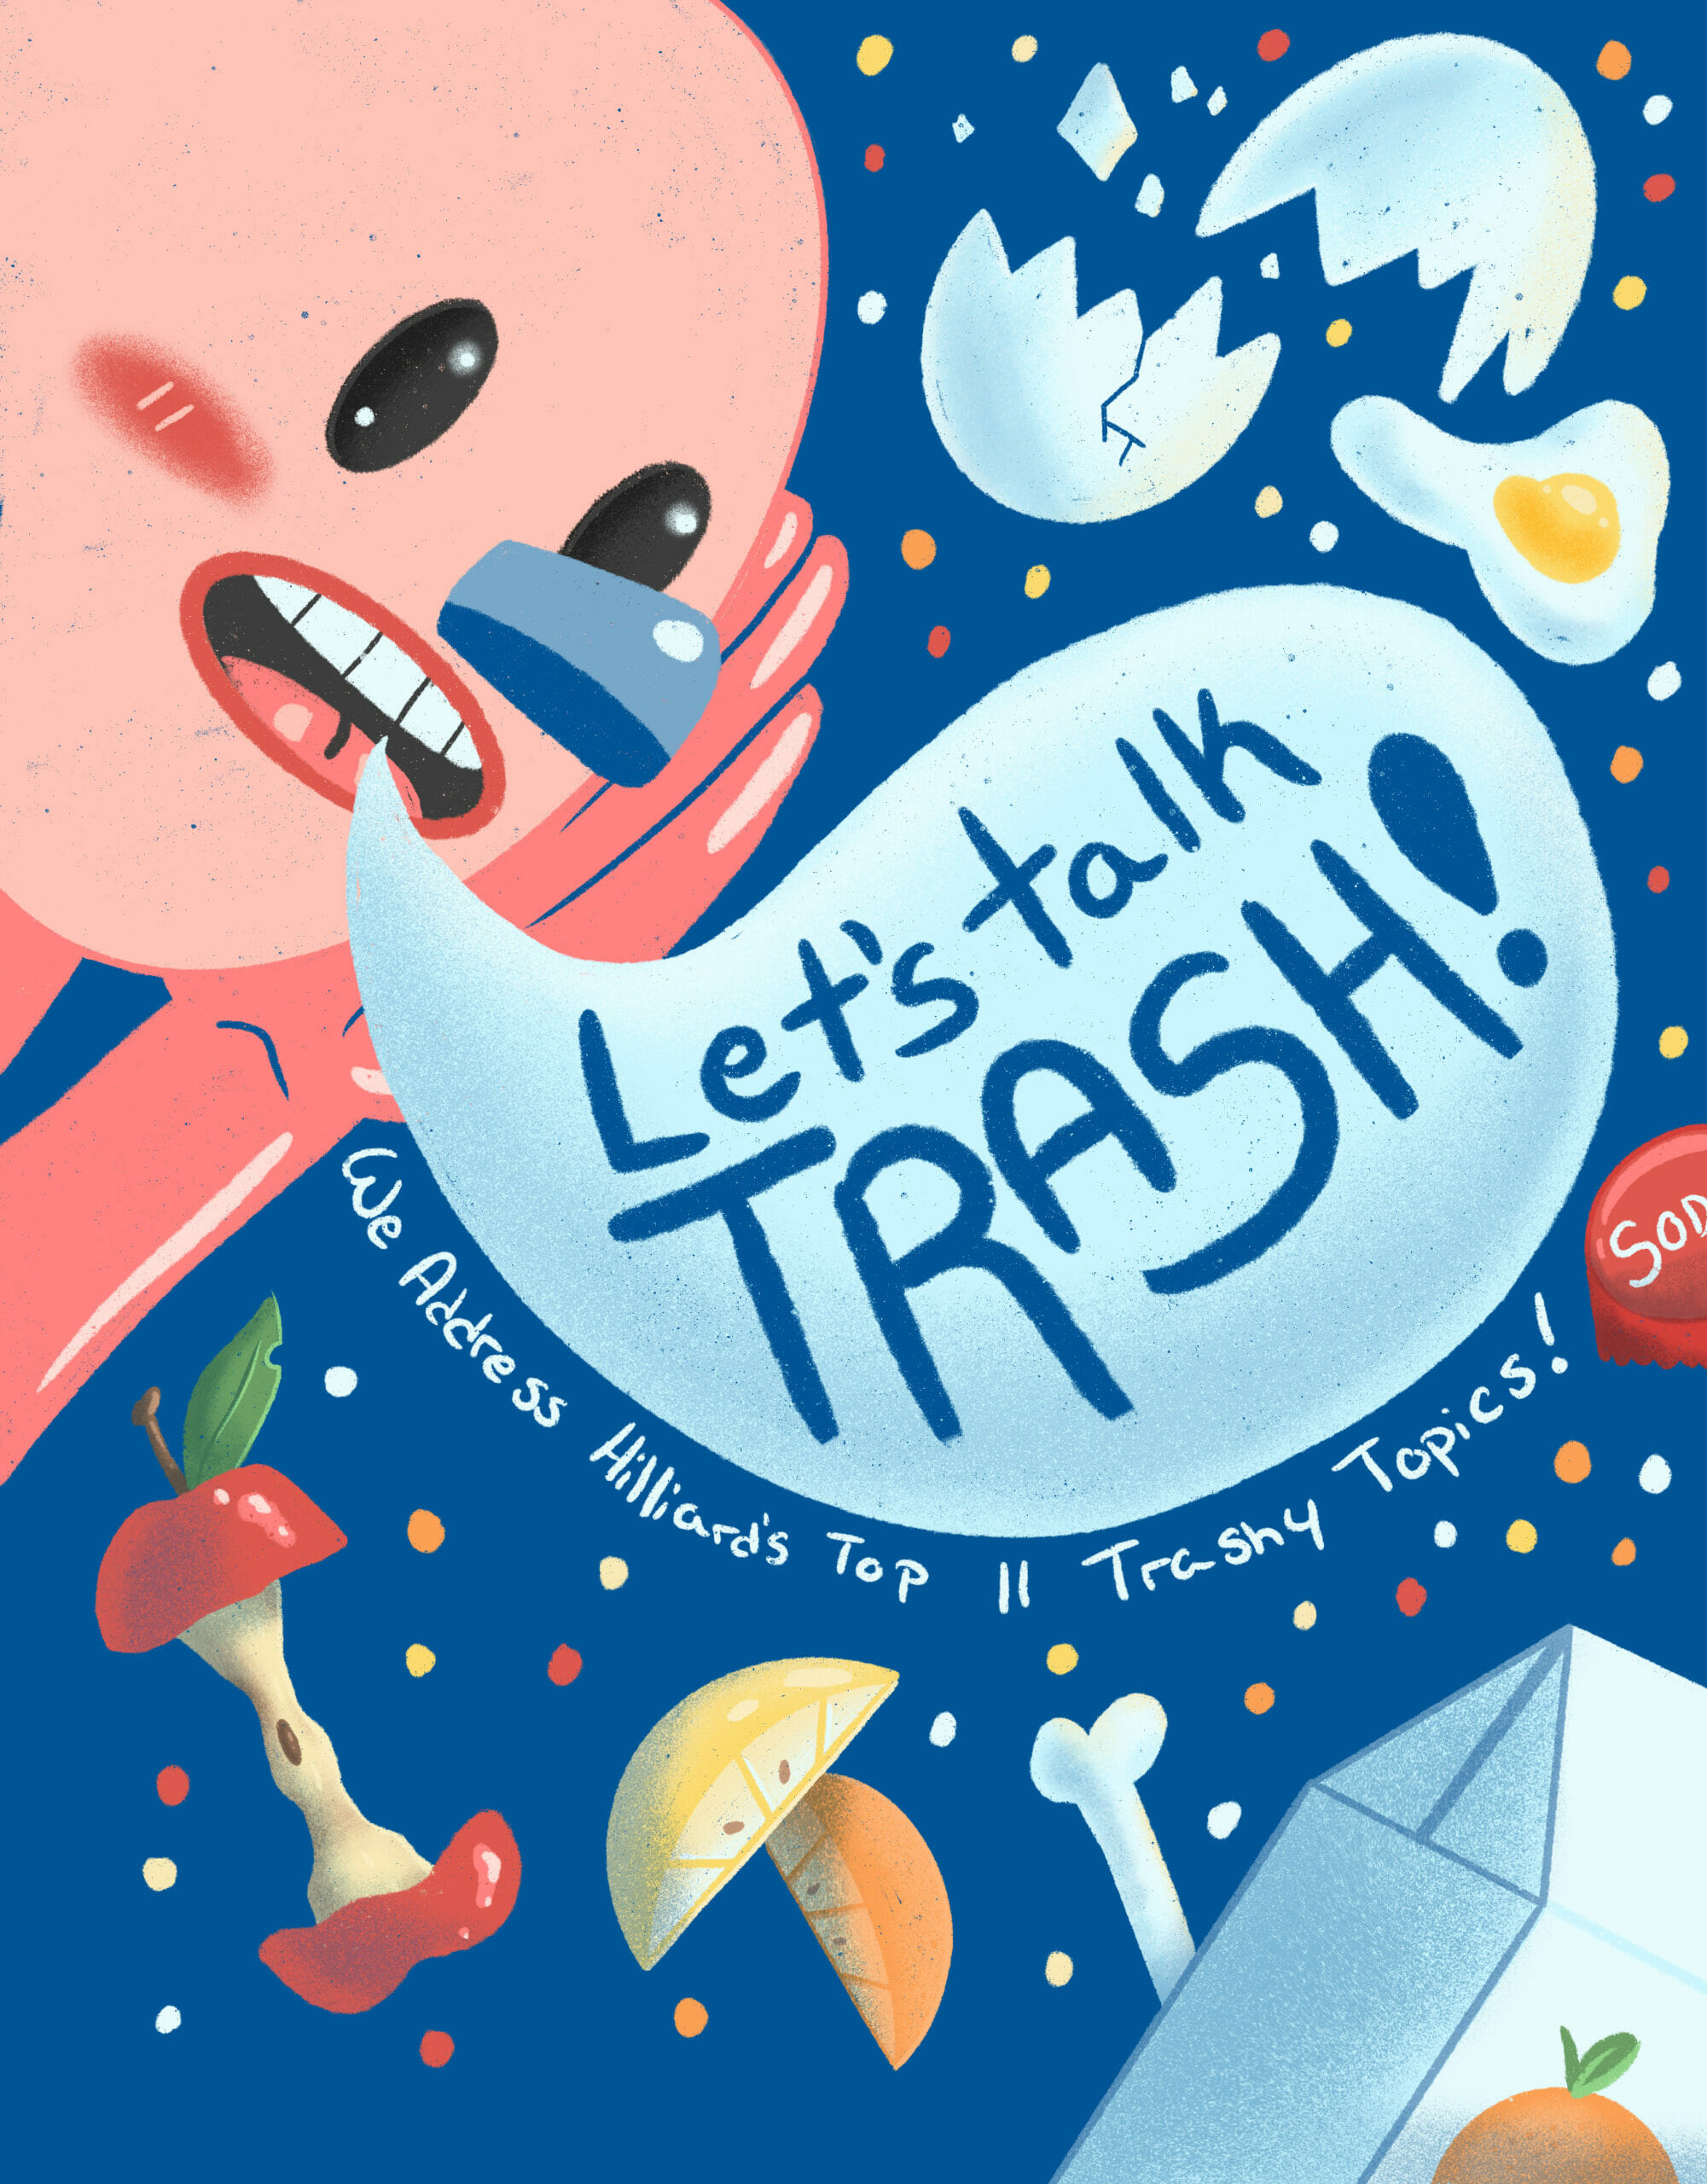 Are Trash Bags Recyclable? We Talk Trash & Garbage Disposal